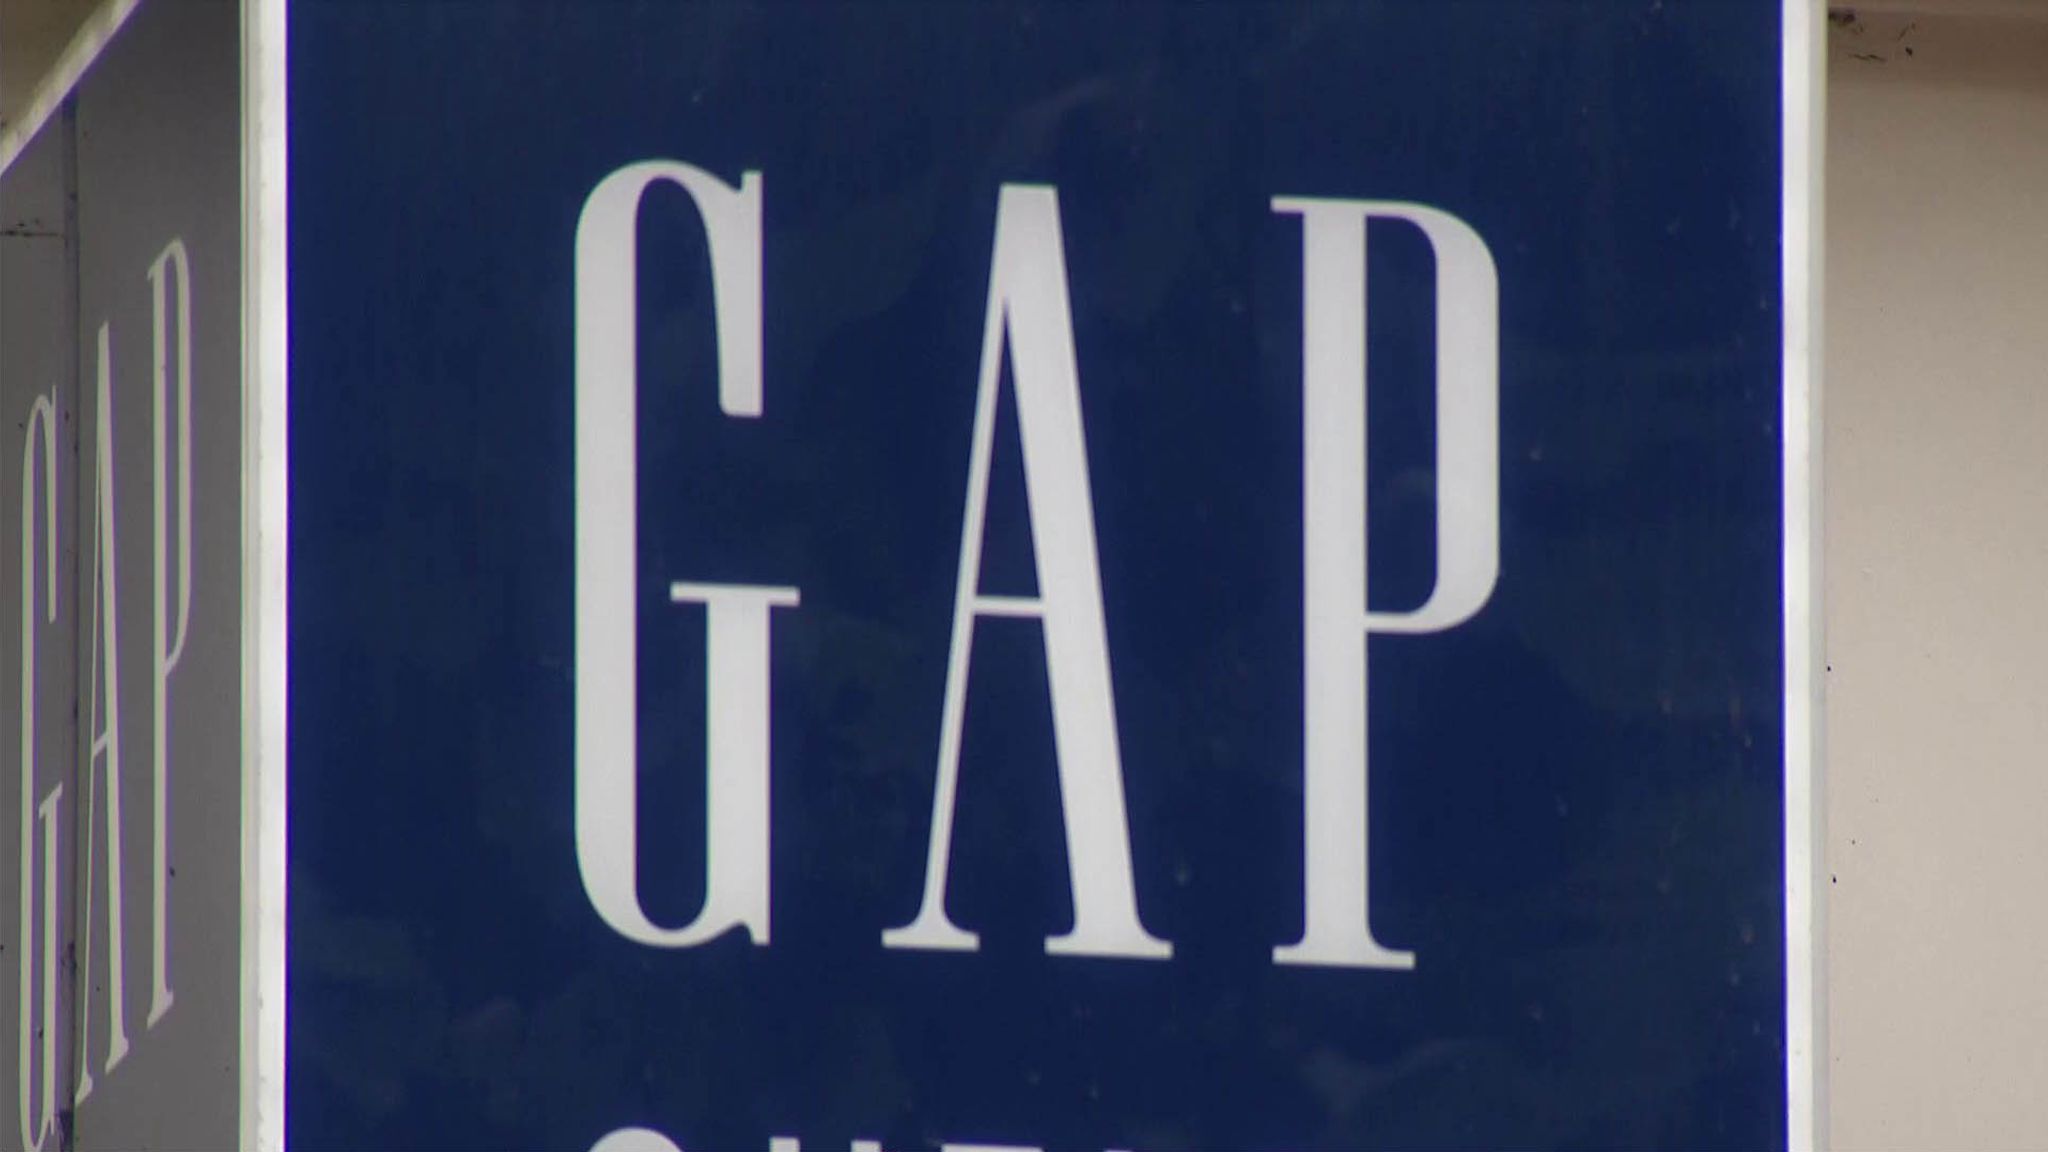 Four reasons why Gap is closing its shops in the UK